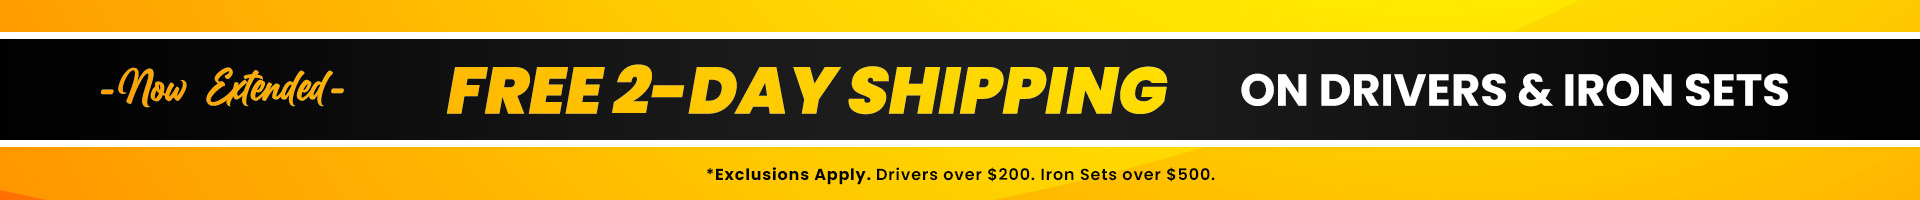 Free 2-day Shipping on Drivers and Iron Sets